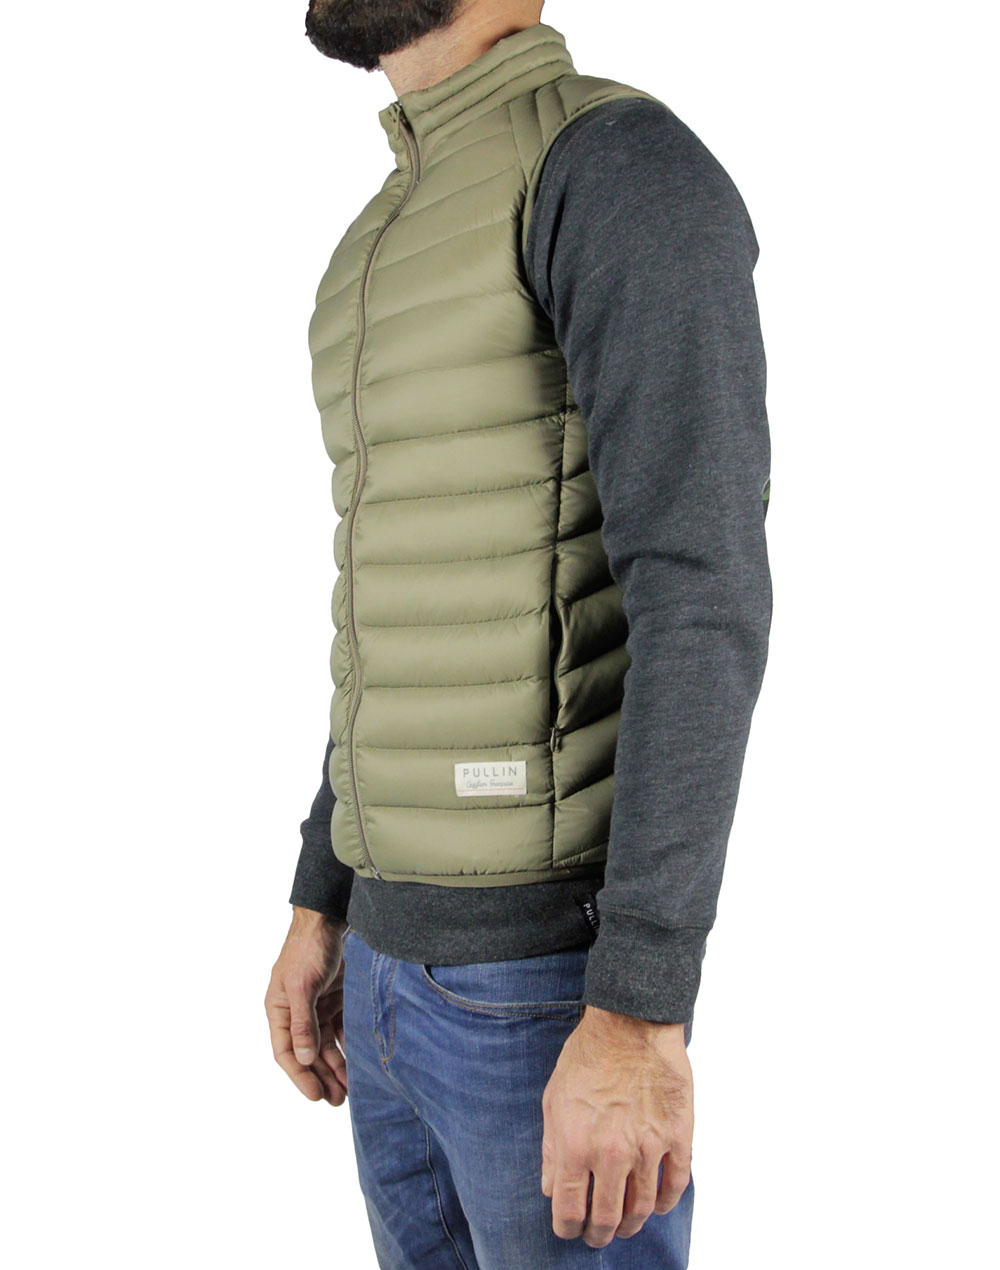 Men's feather jacket without sleeves HOMELAND